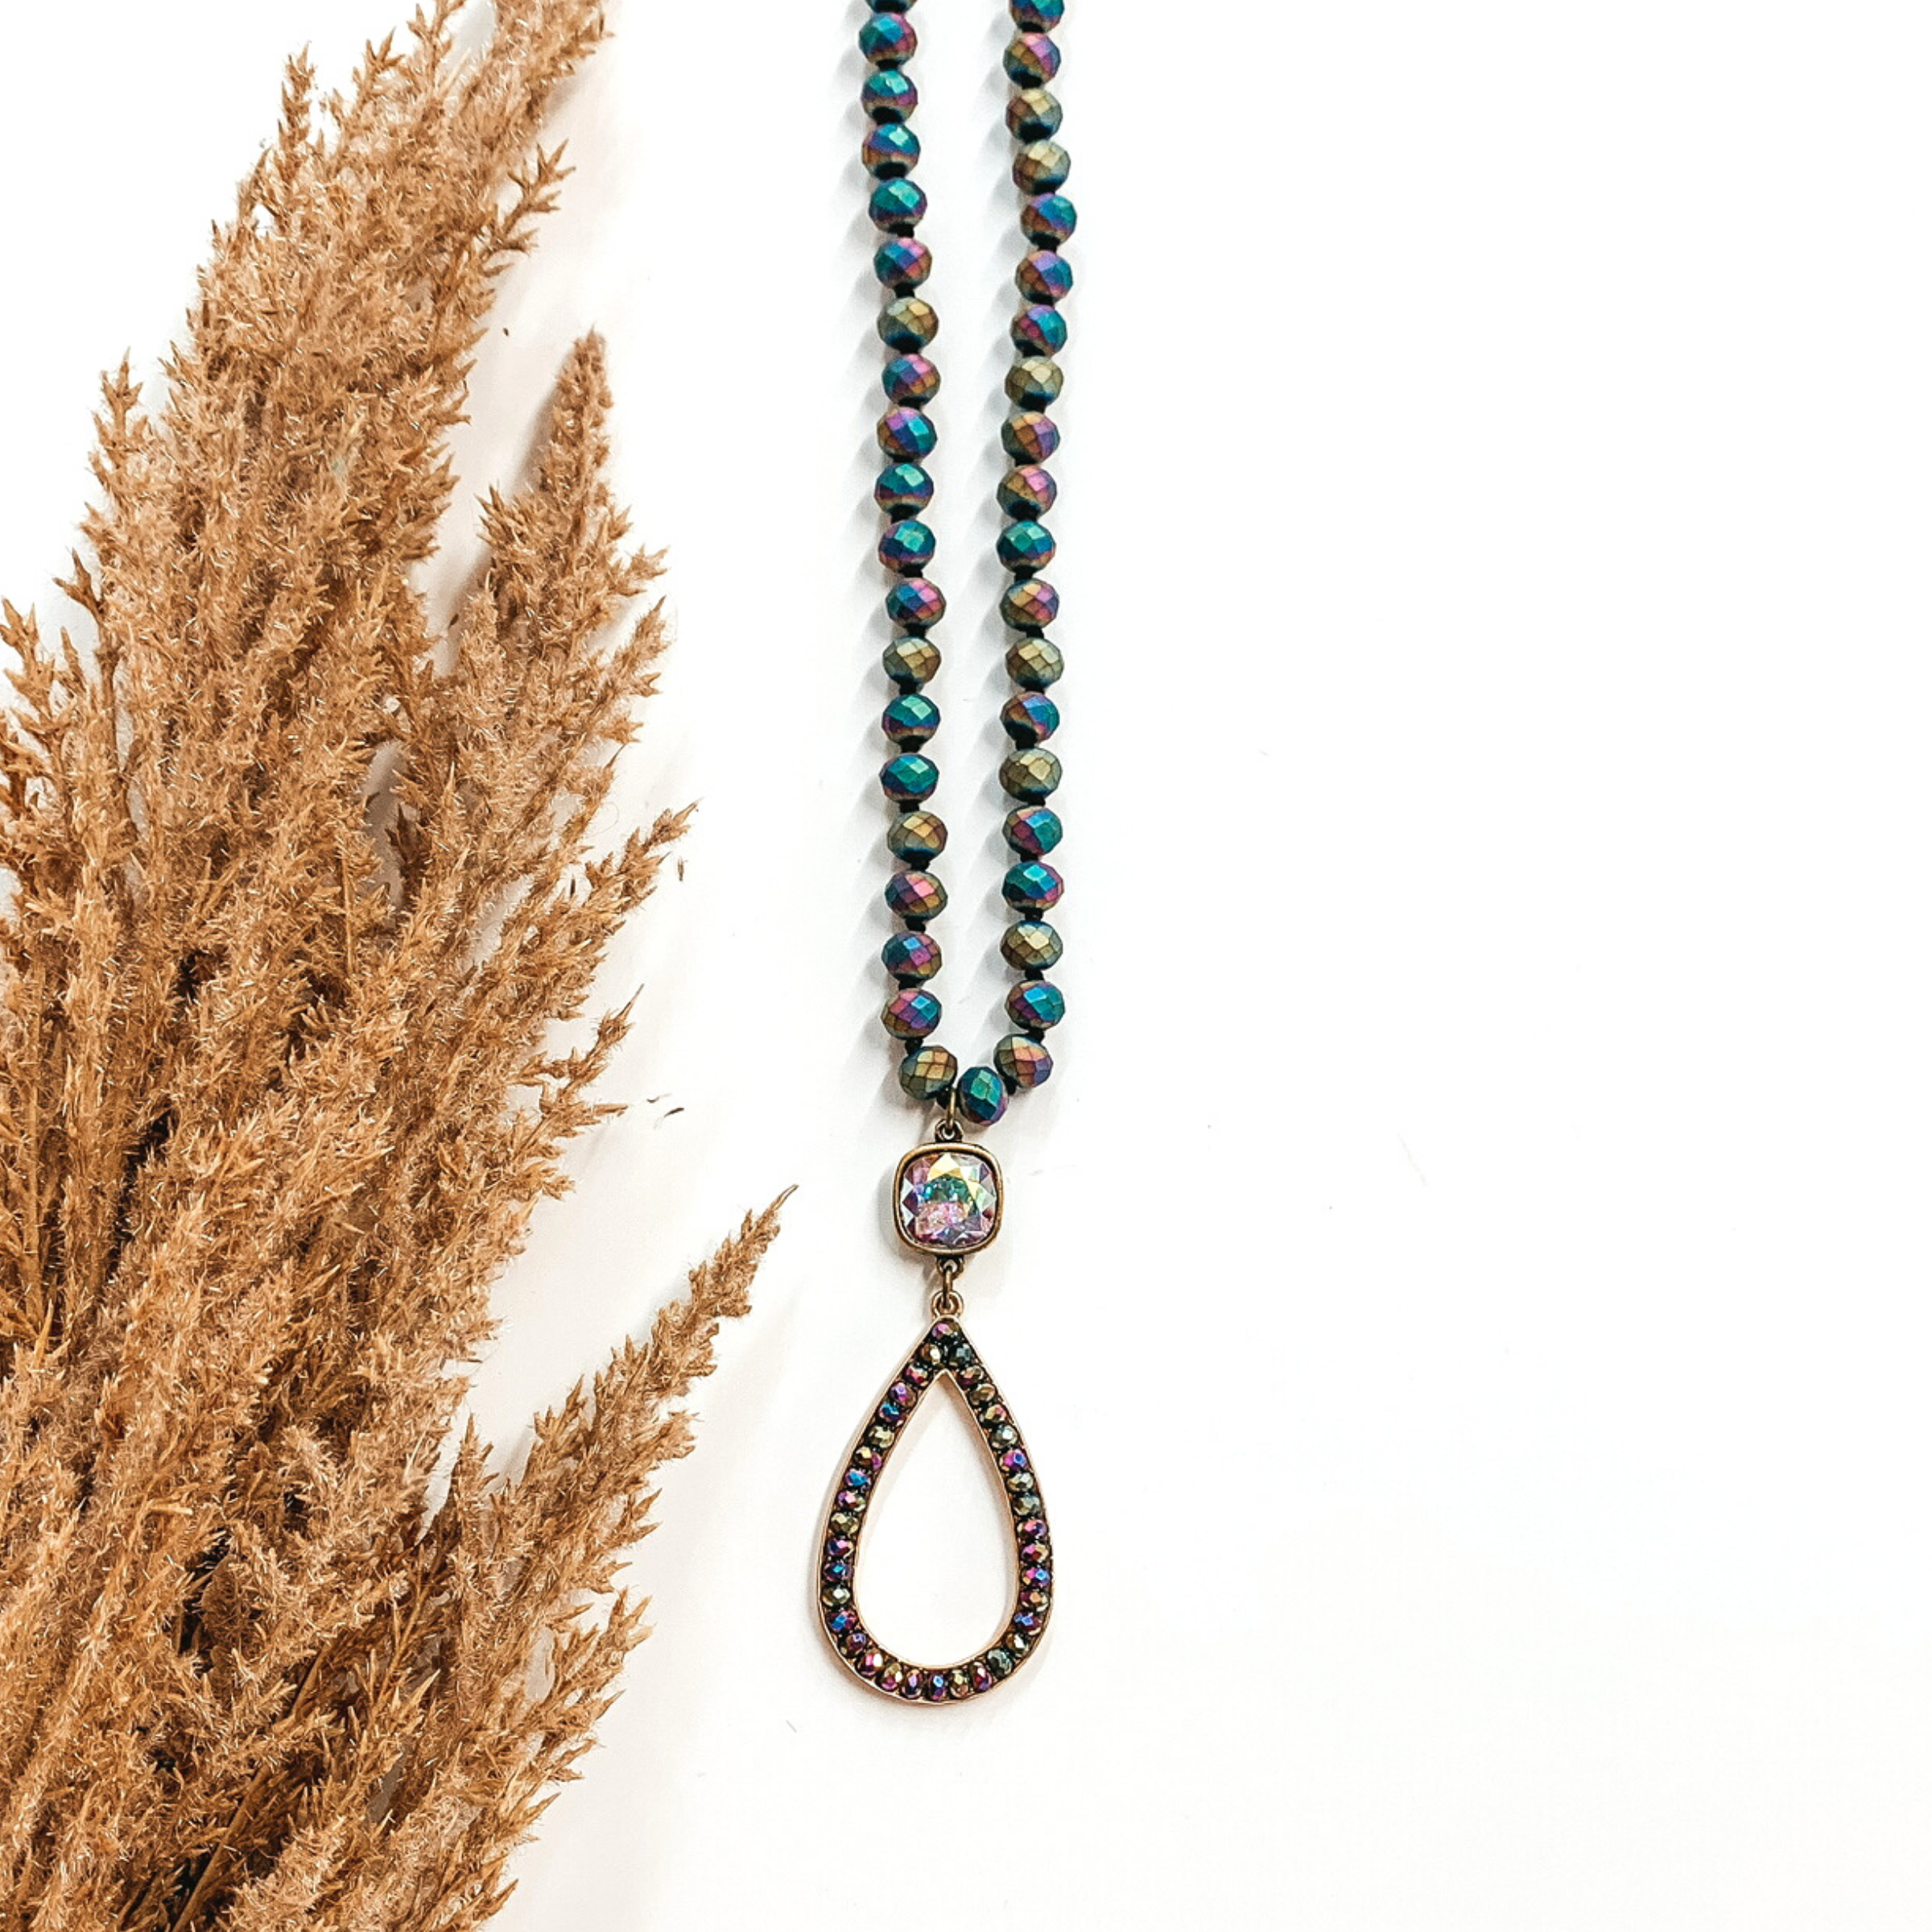 dark colorful long necklace in purples with ab crystal charm and teardrop pendant 